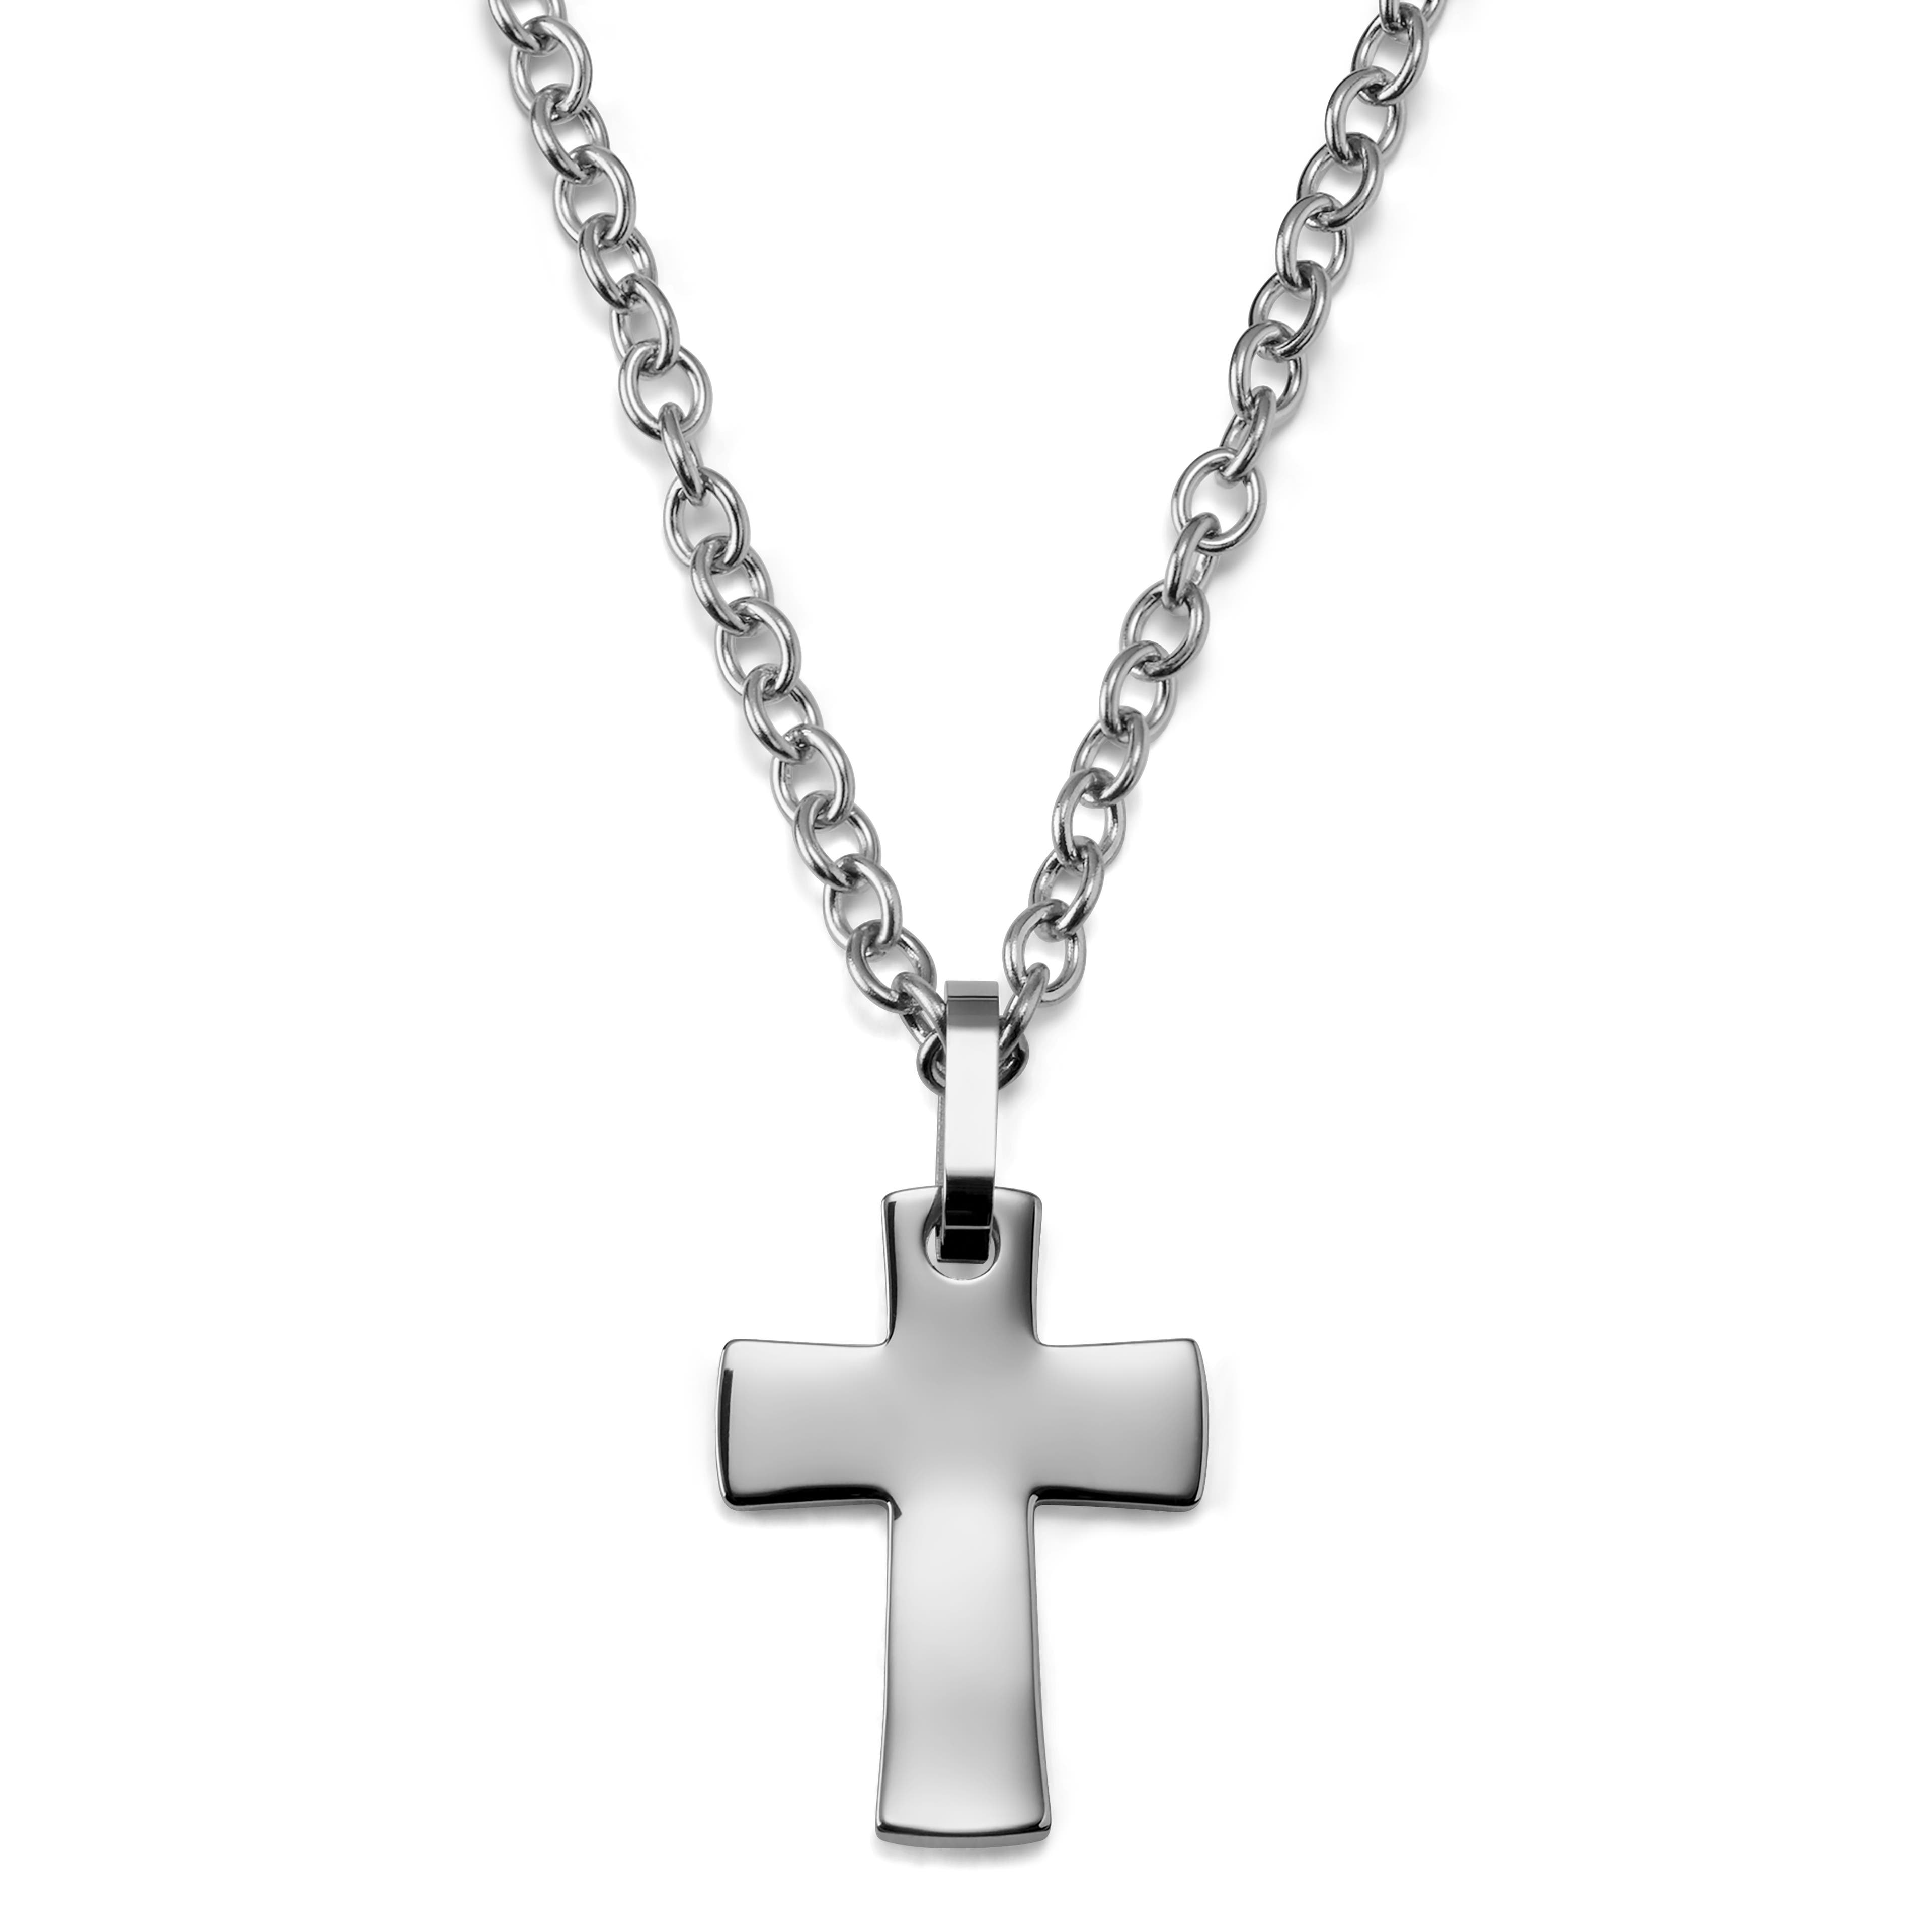 Silver-Tone Stainless Steel Unique Curvy Cross Cable Chain Necklace